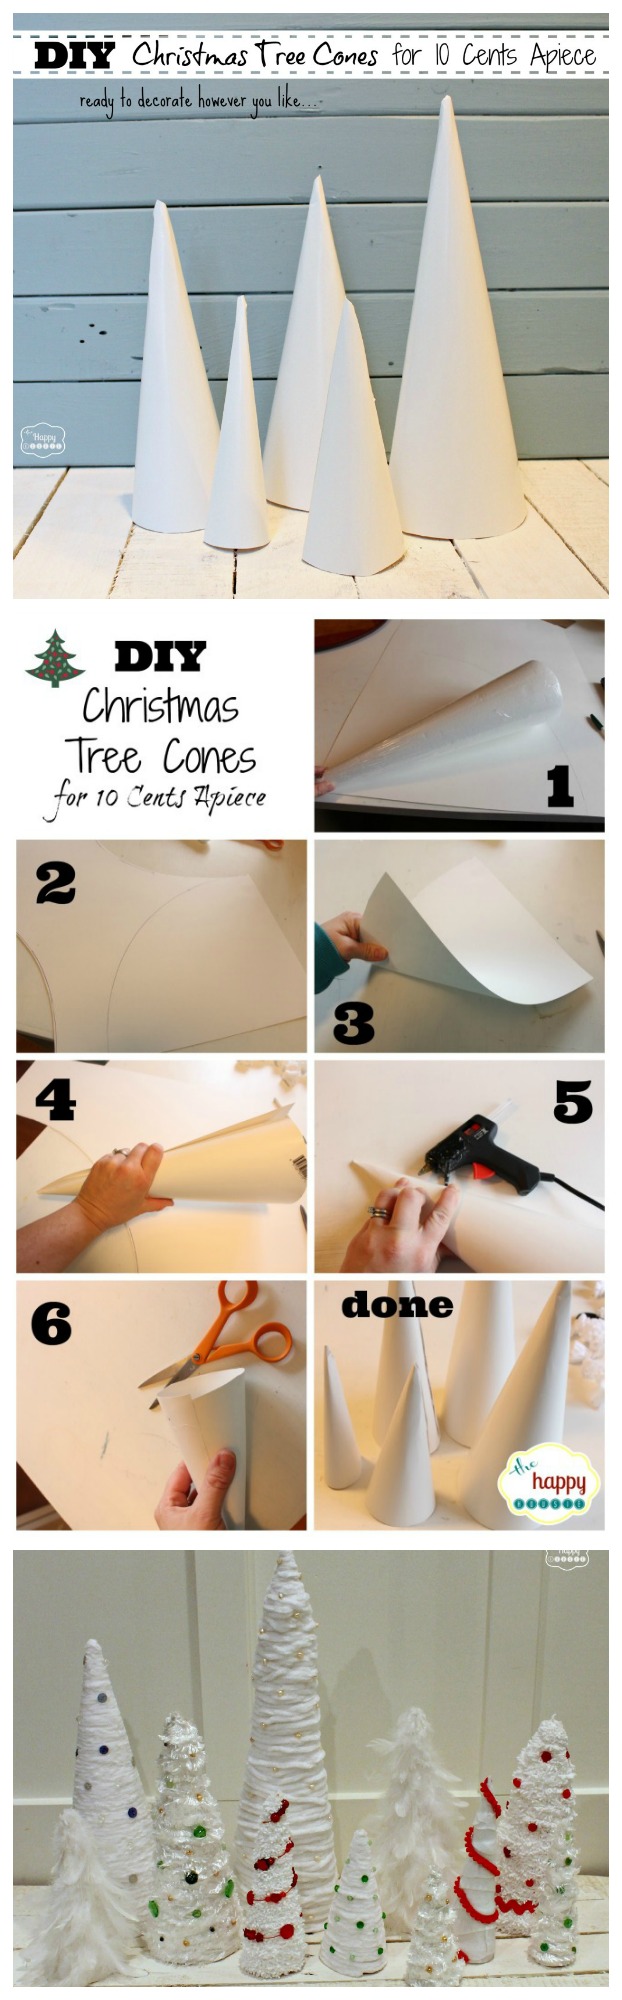 DIY Christmas Tree Cones for ten cents apiece - save money and make your own cone forms for Christmas tree craft projects at The Happy Housie